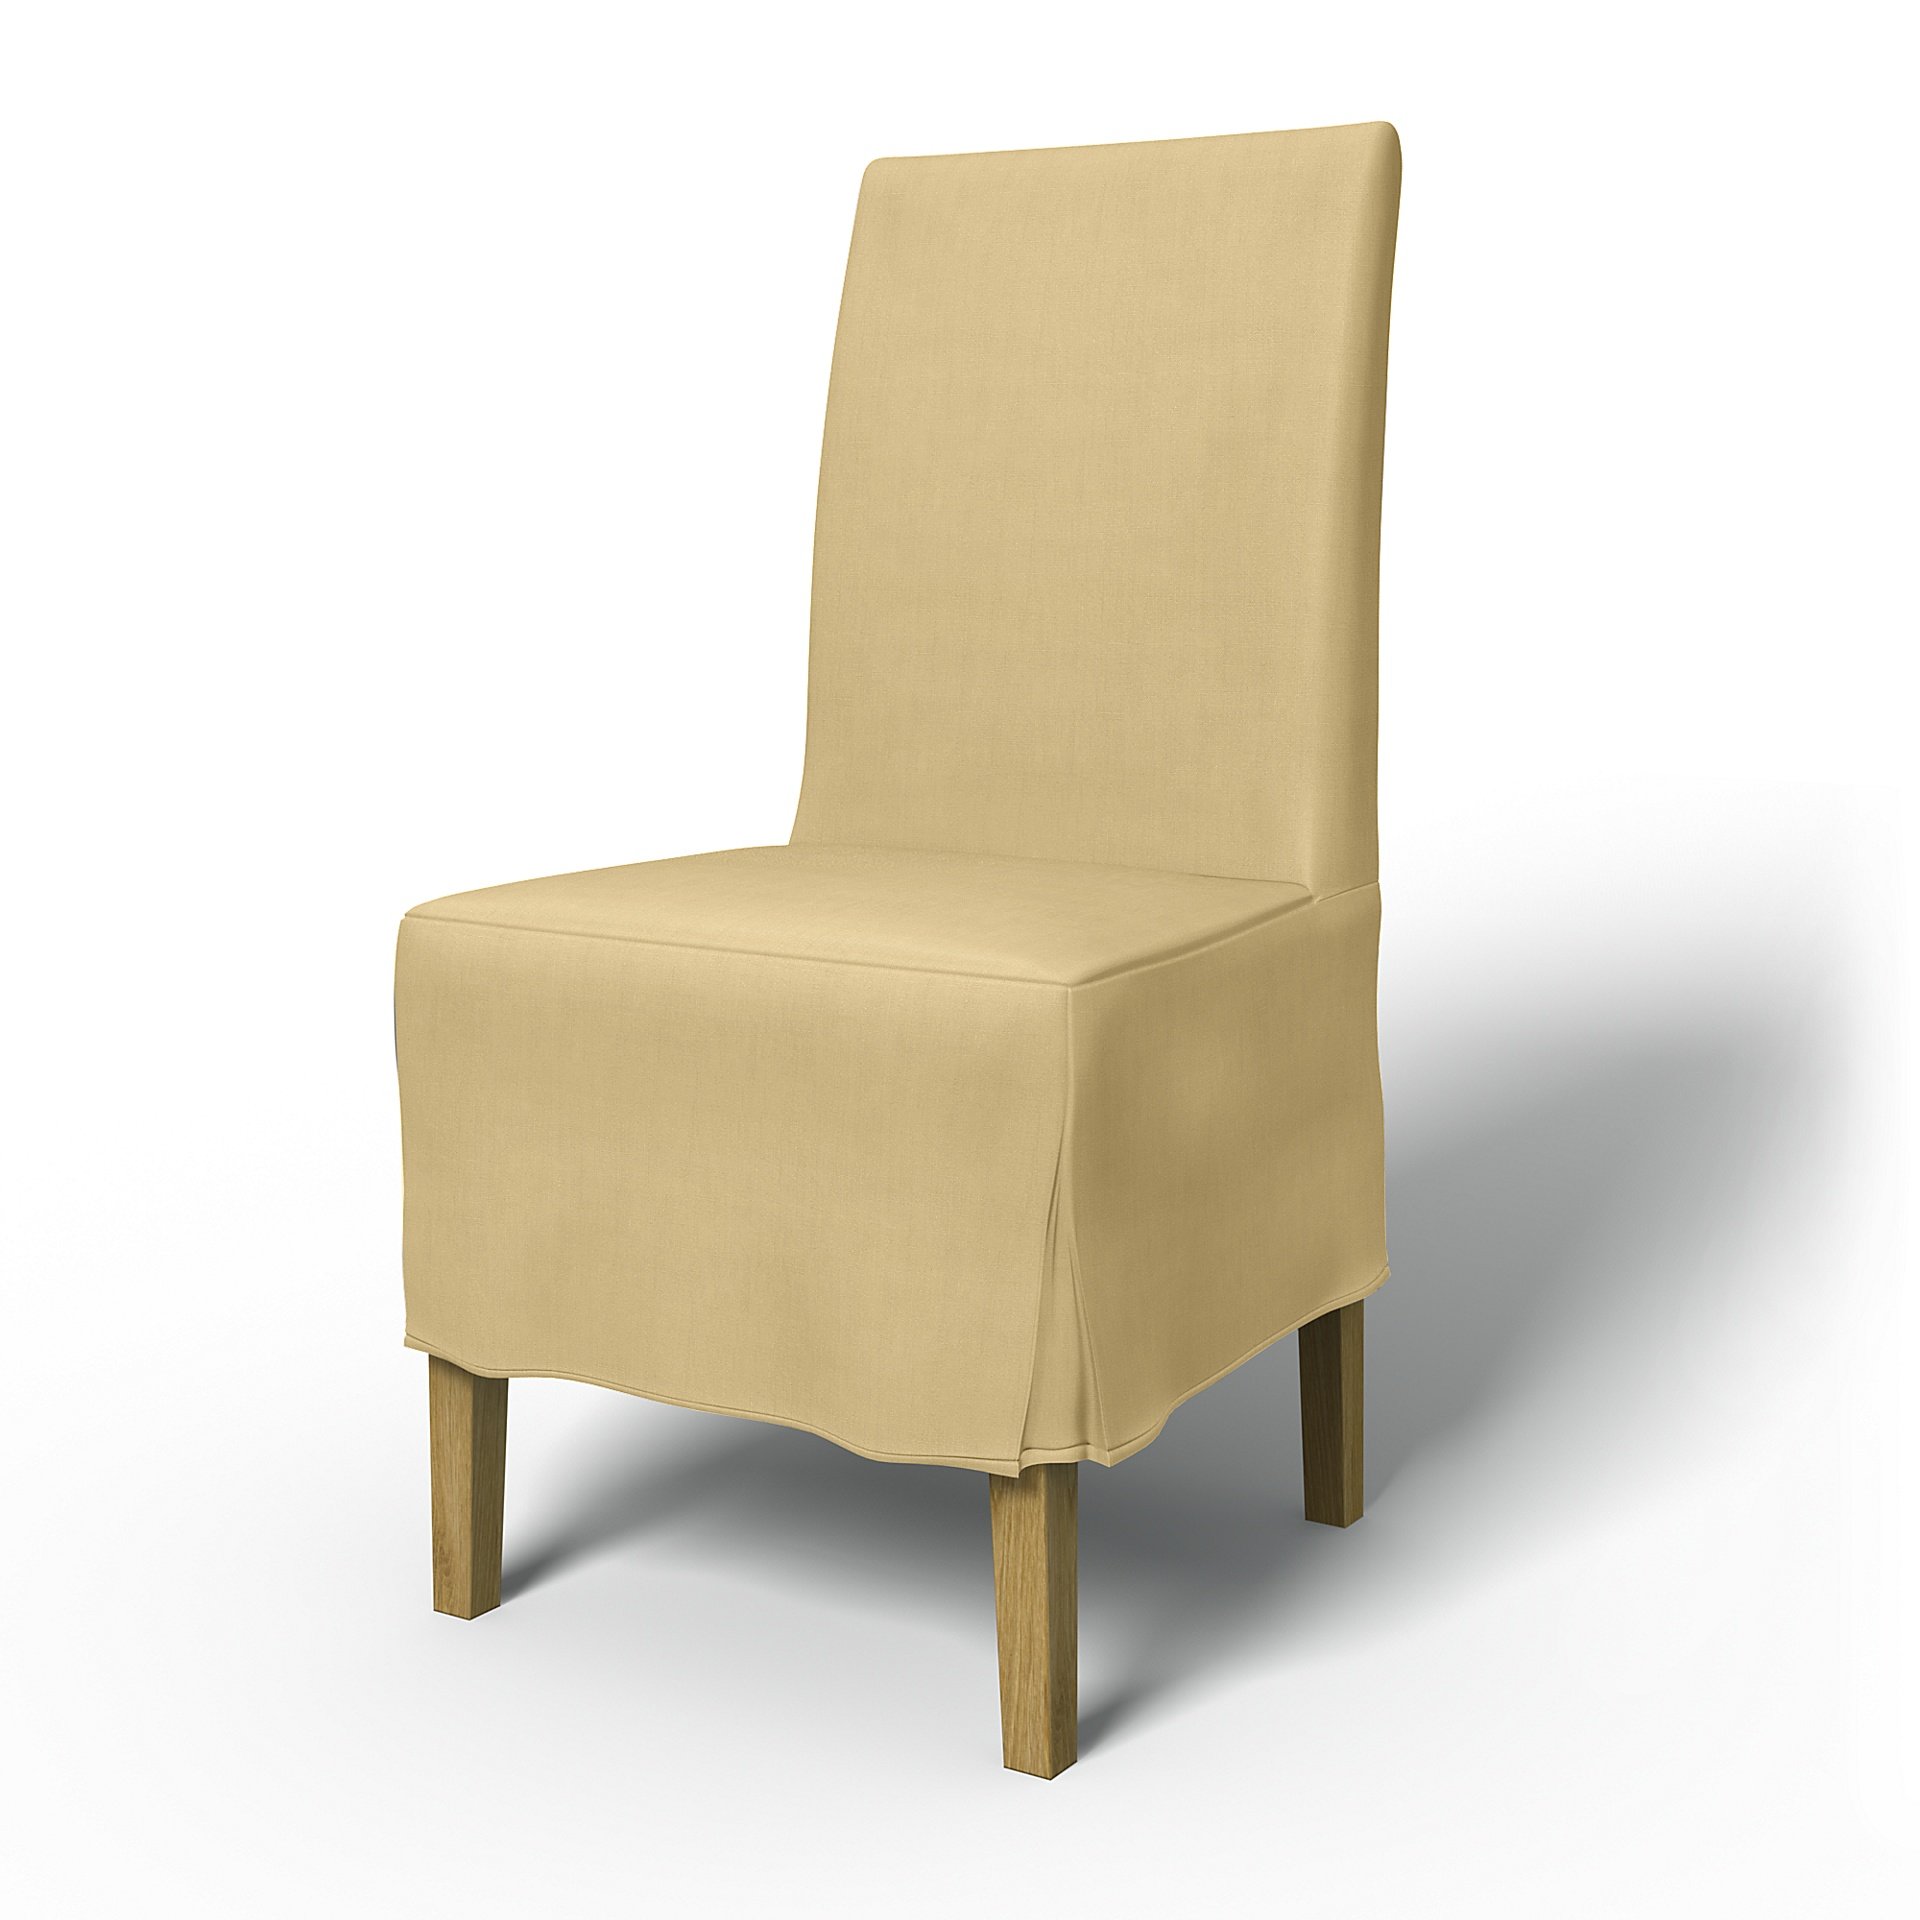 IKEA - Henriksdal Dining Chair Cover Medium skirt with Box Pleat (Standard model), Straw Yellow, Lin